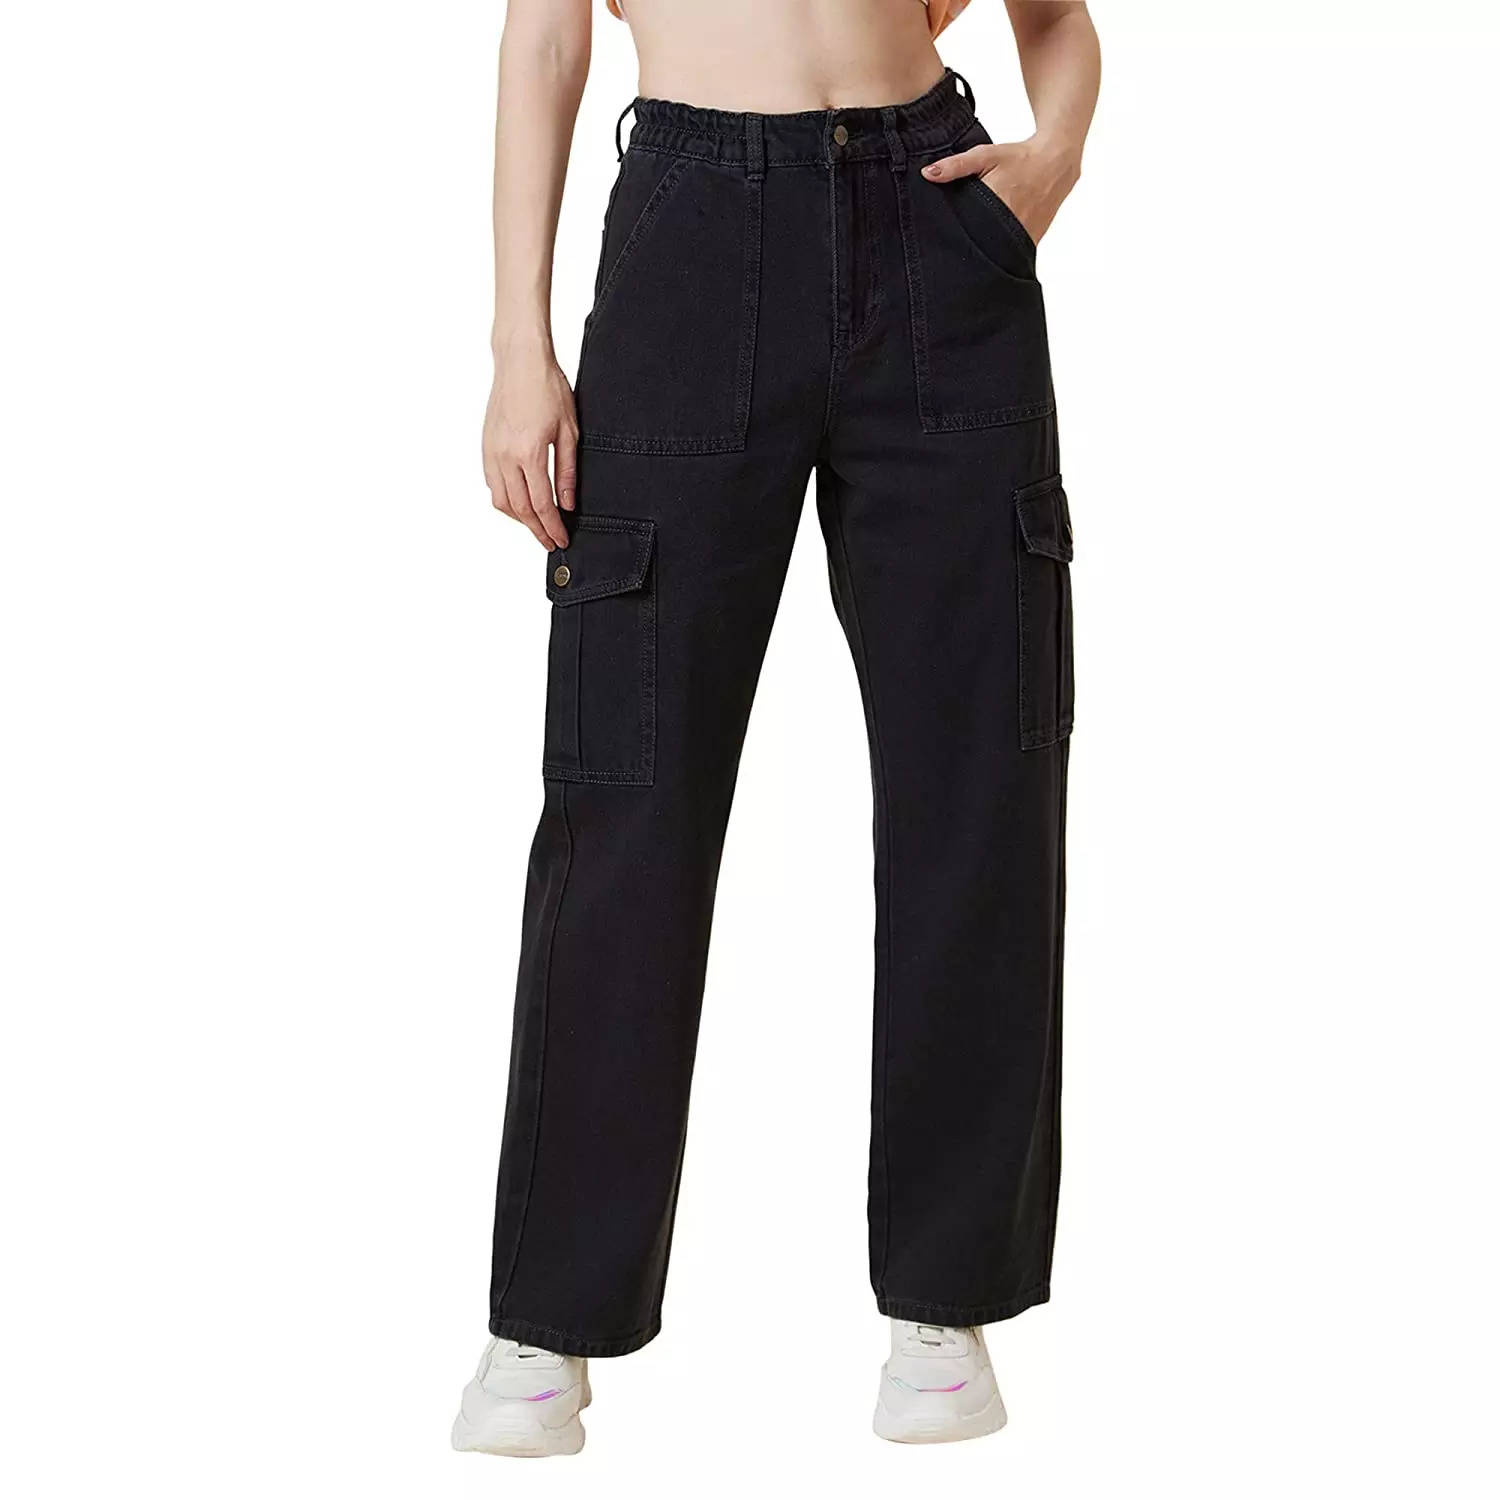 Buy Abcustoms(All Black Customs) Stylish Streetwear Hiphop Black Elastic  Waist Punk Pant with Ribbons at Amazon.in